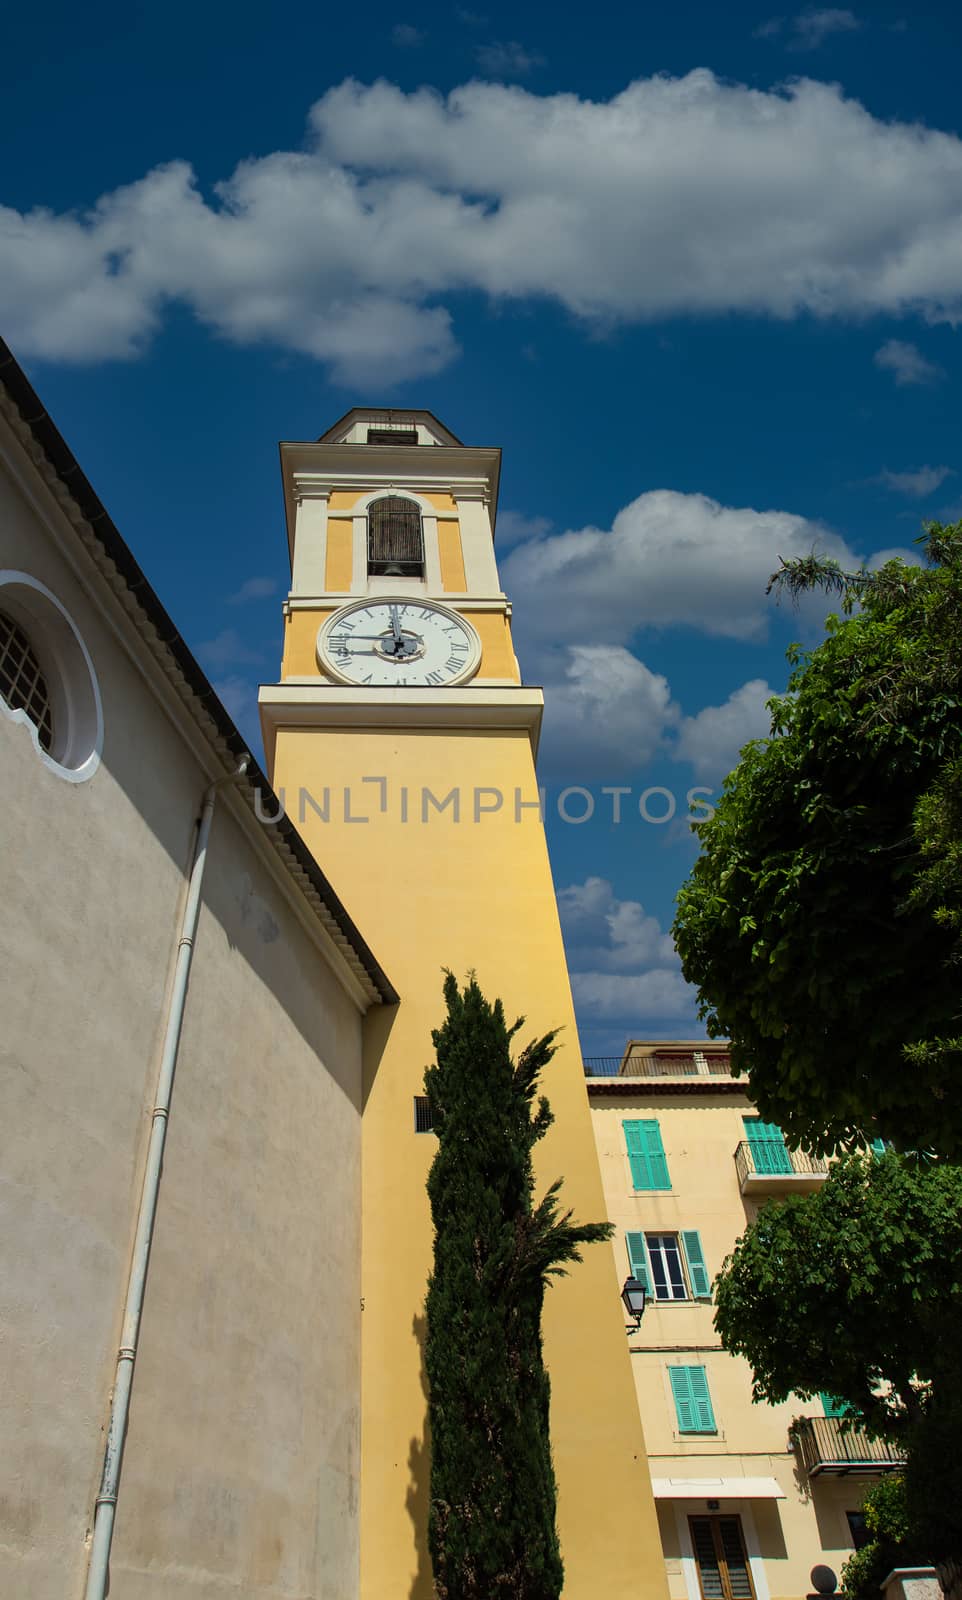 Yellow clock tower in Villefranche, France under clear blue skies